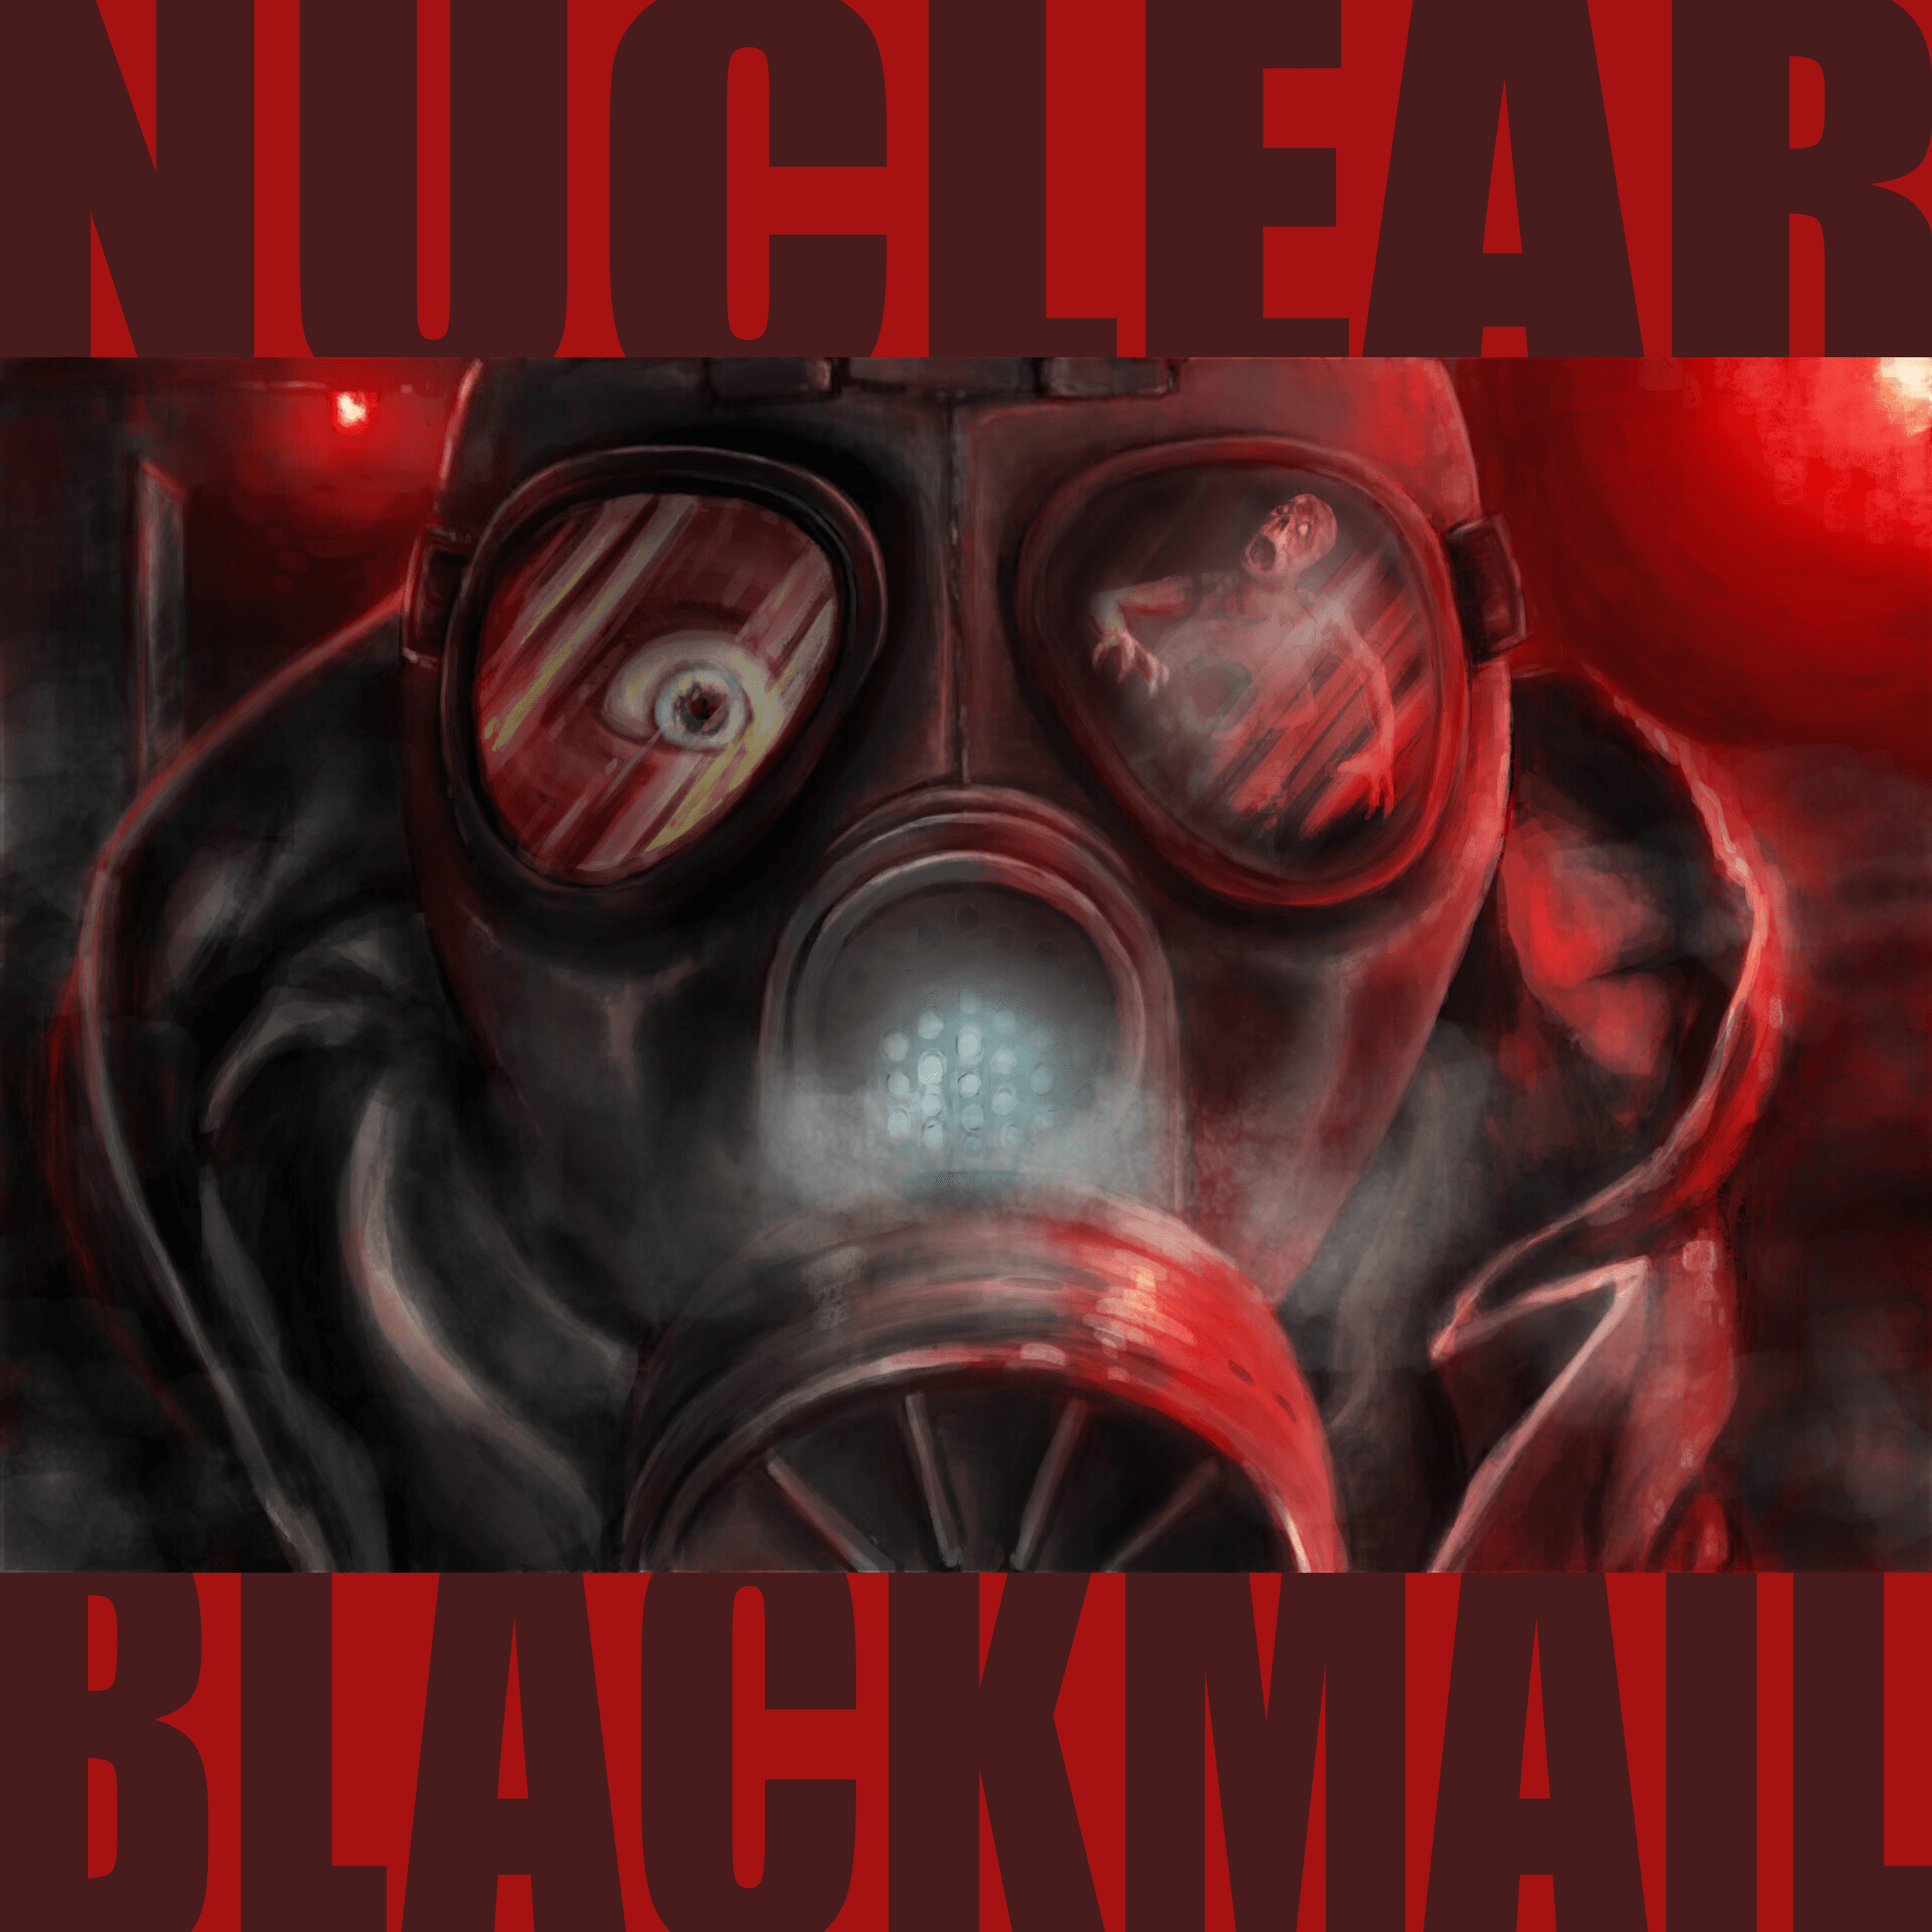 NUCLEAR BLACKMAIL